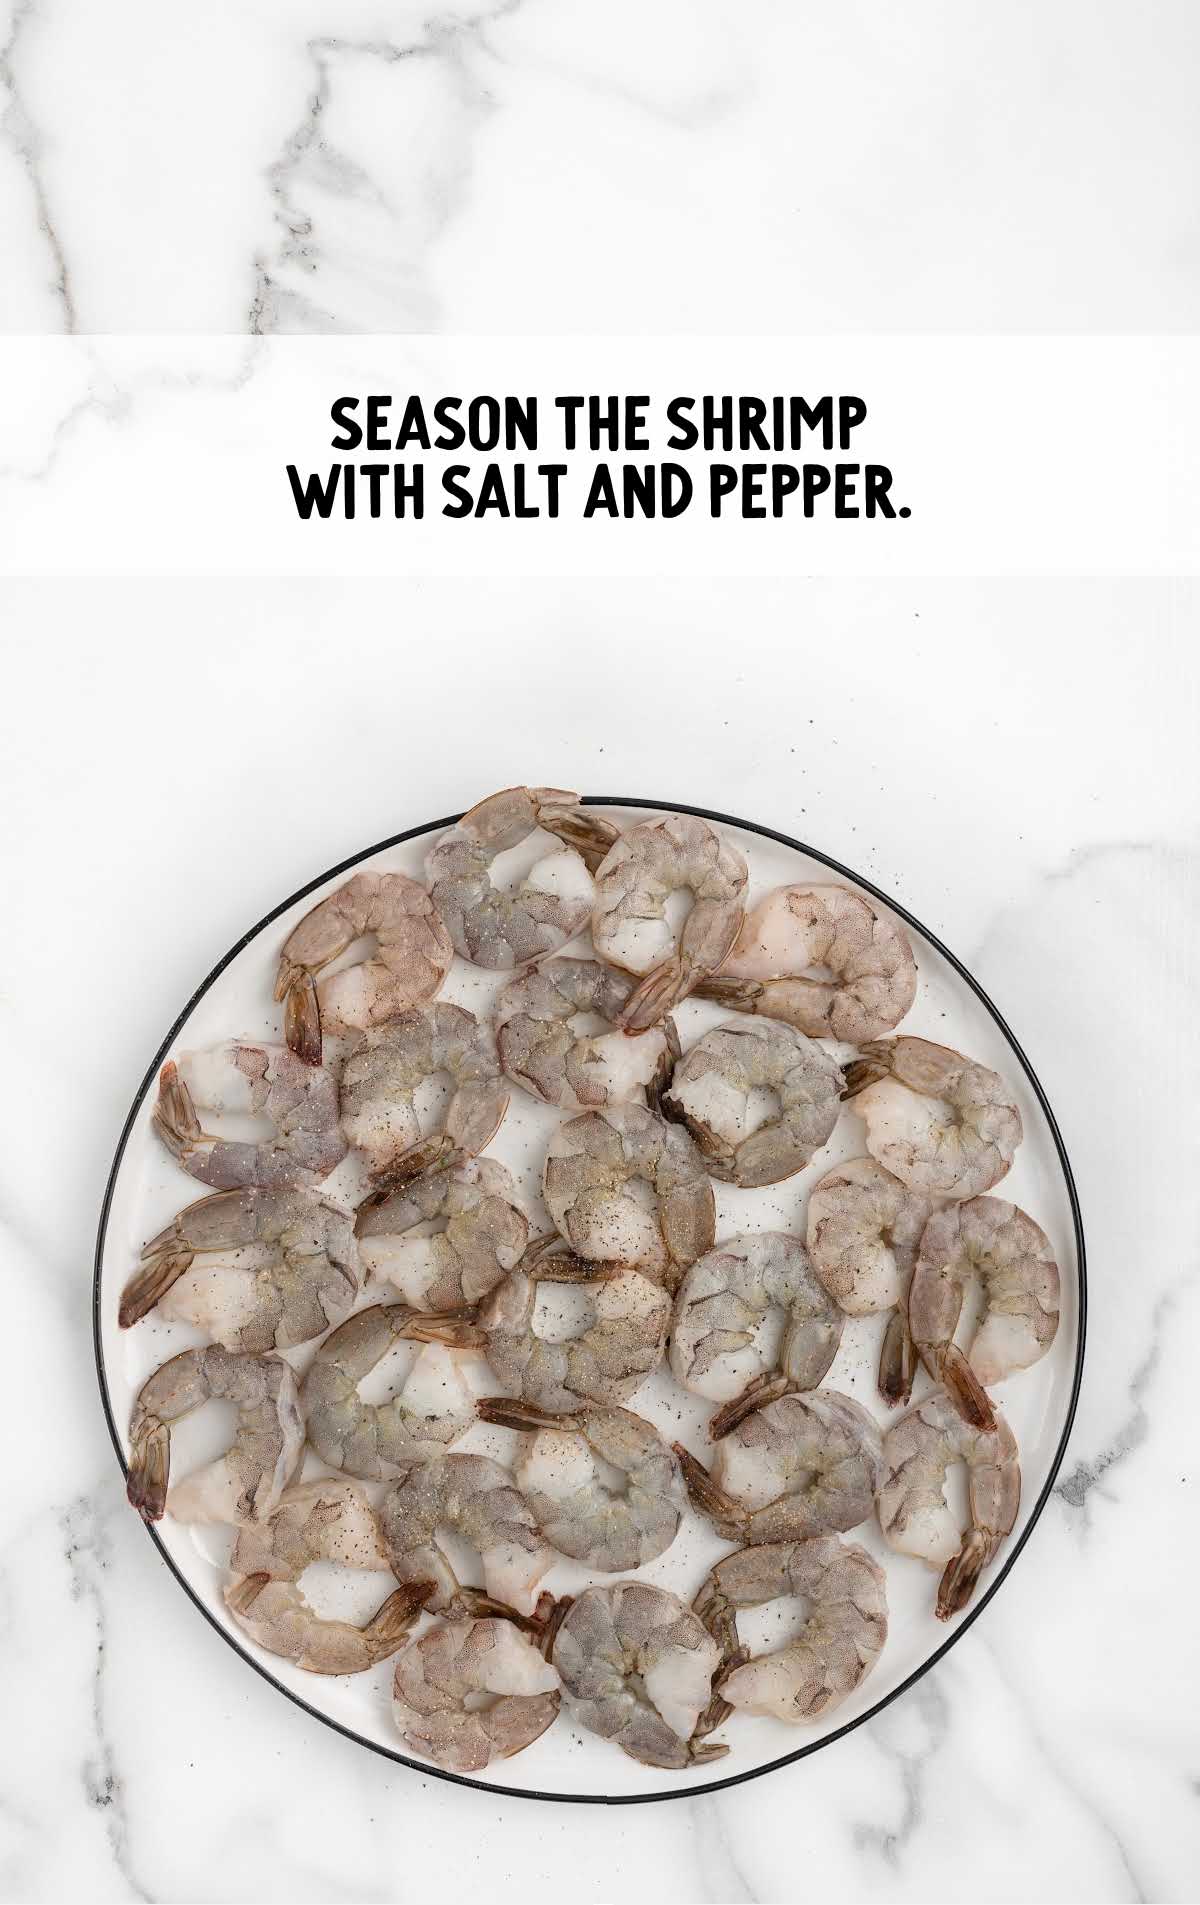 shrimp seasoned with salt and pepper on a plate